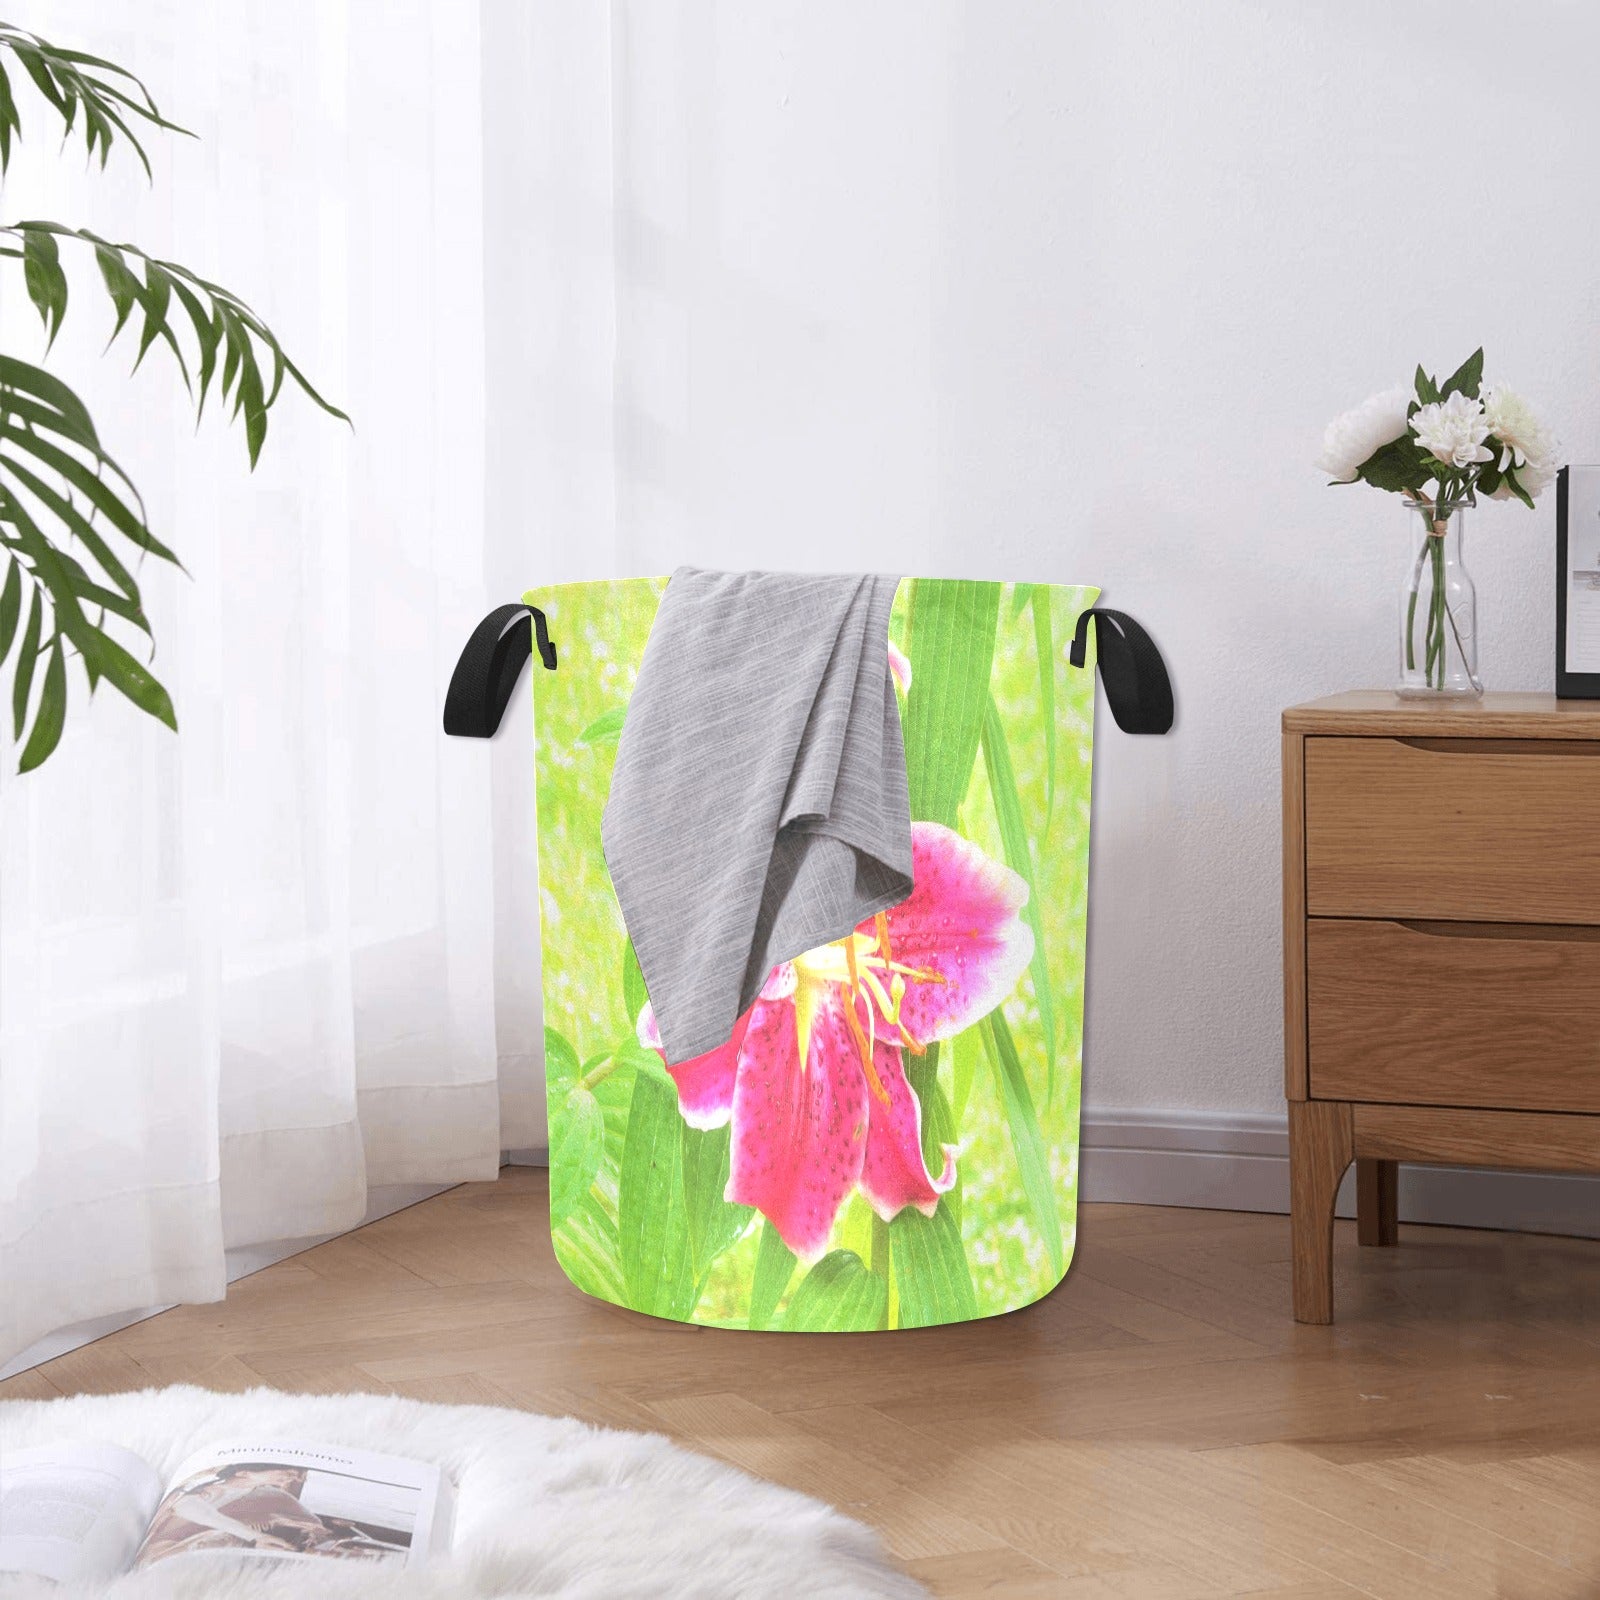 Fabric Laundry Basket with Handles, Pretty Deep Pink Stargazer Lily on Lime Green